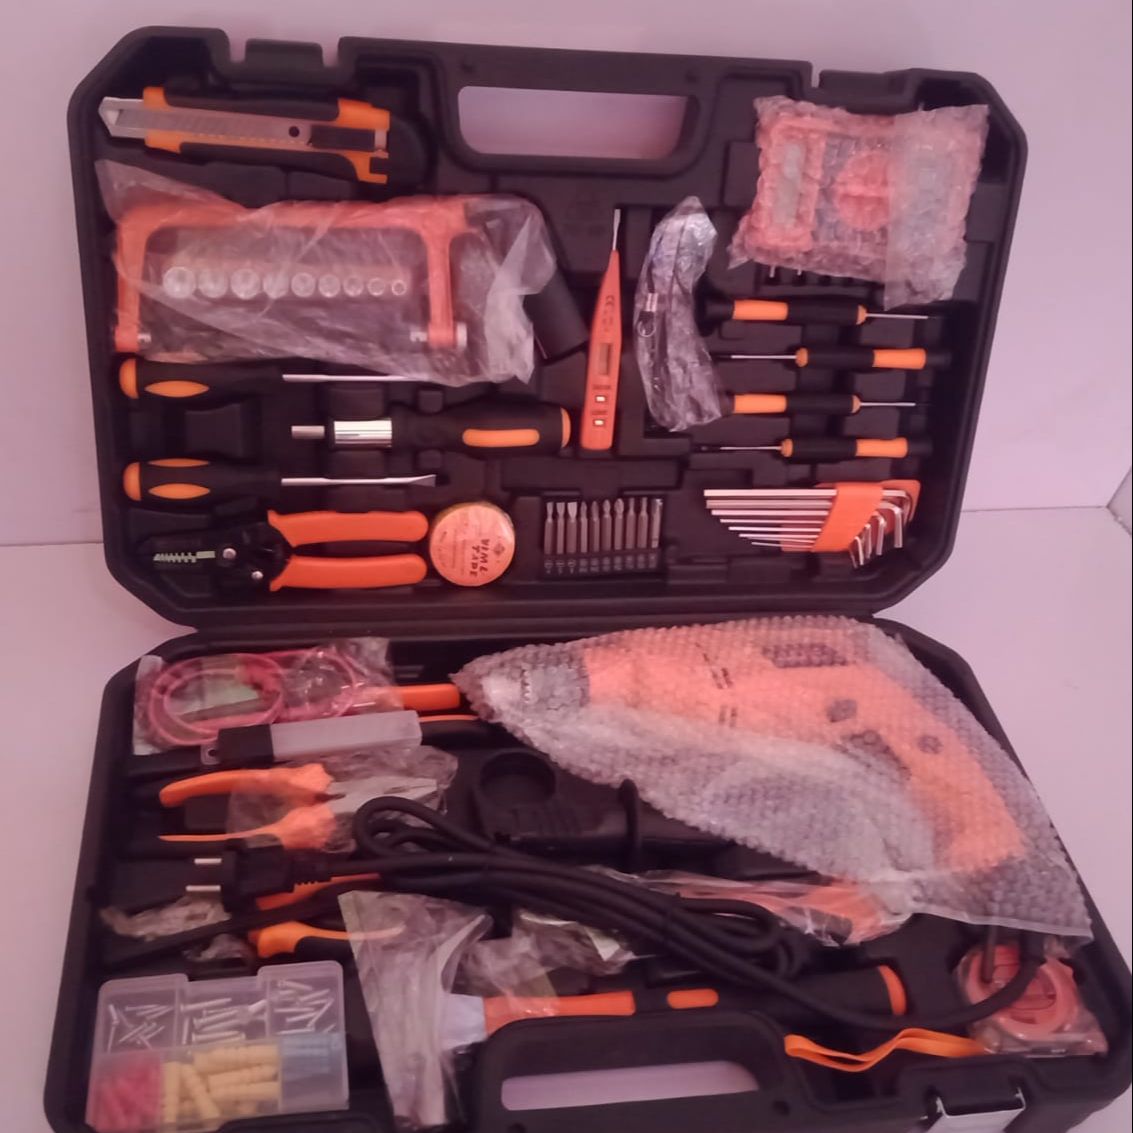 Imported 128 Pcs Toolkit With 100% Pure Copper Winding 1250watt Electric Drill Machine compilate Accessory